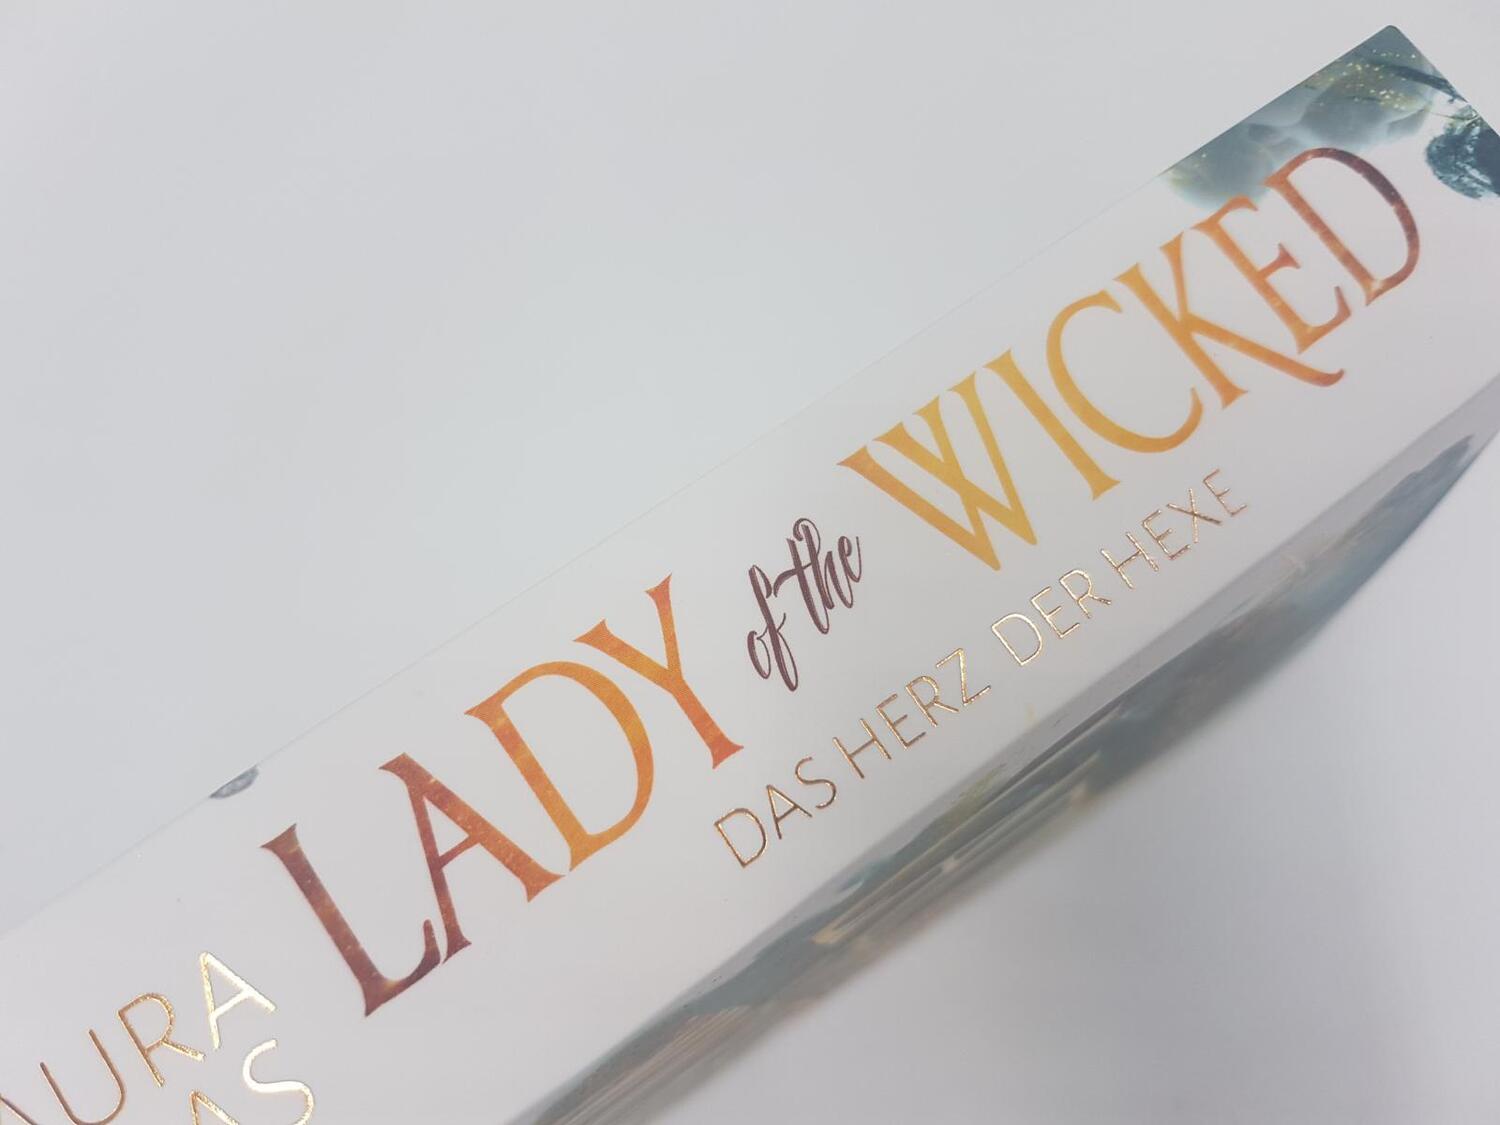 Bild: 9783492706414 | Lady of the Wicked | Laura Labas | Taschenbuch | Lady of the Wicked